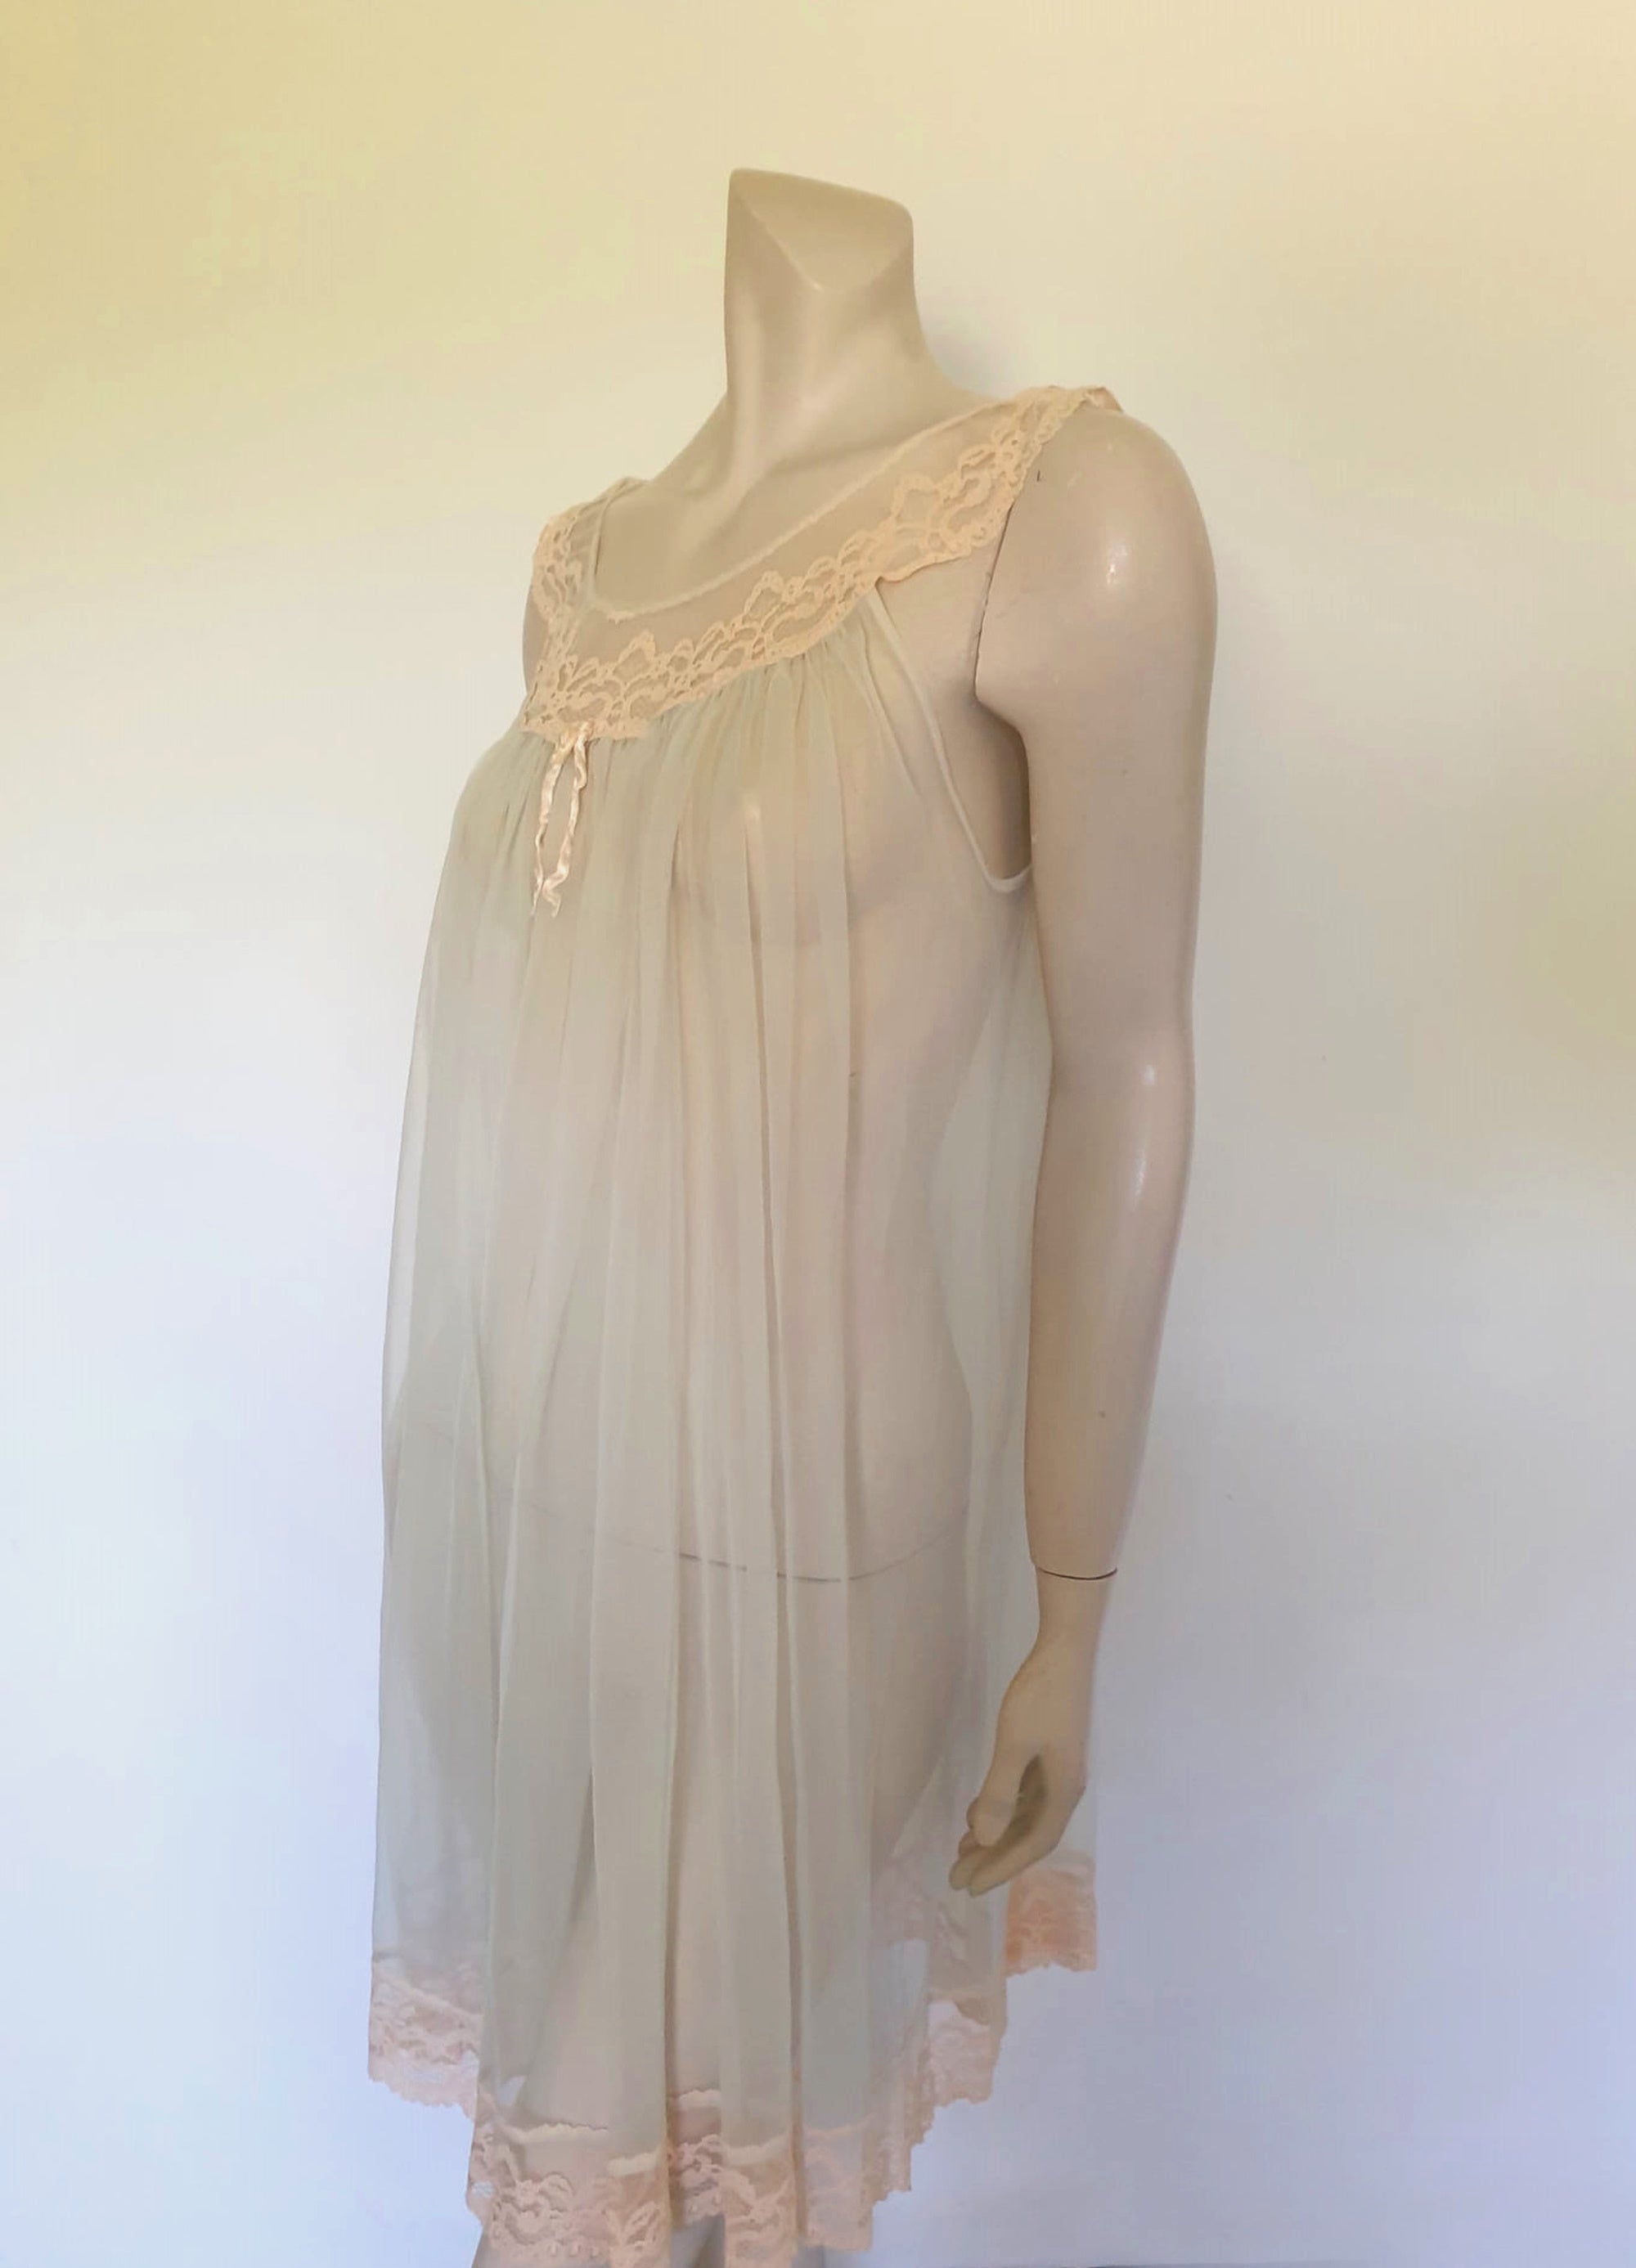 1960s vintage sheer ice blue nightgown with ecru lace